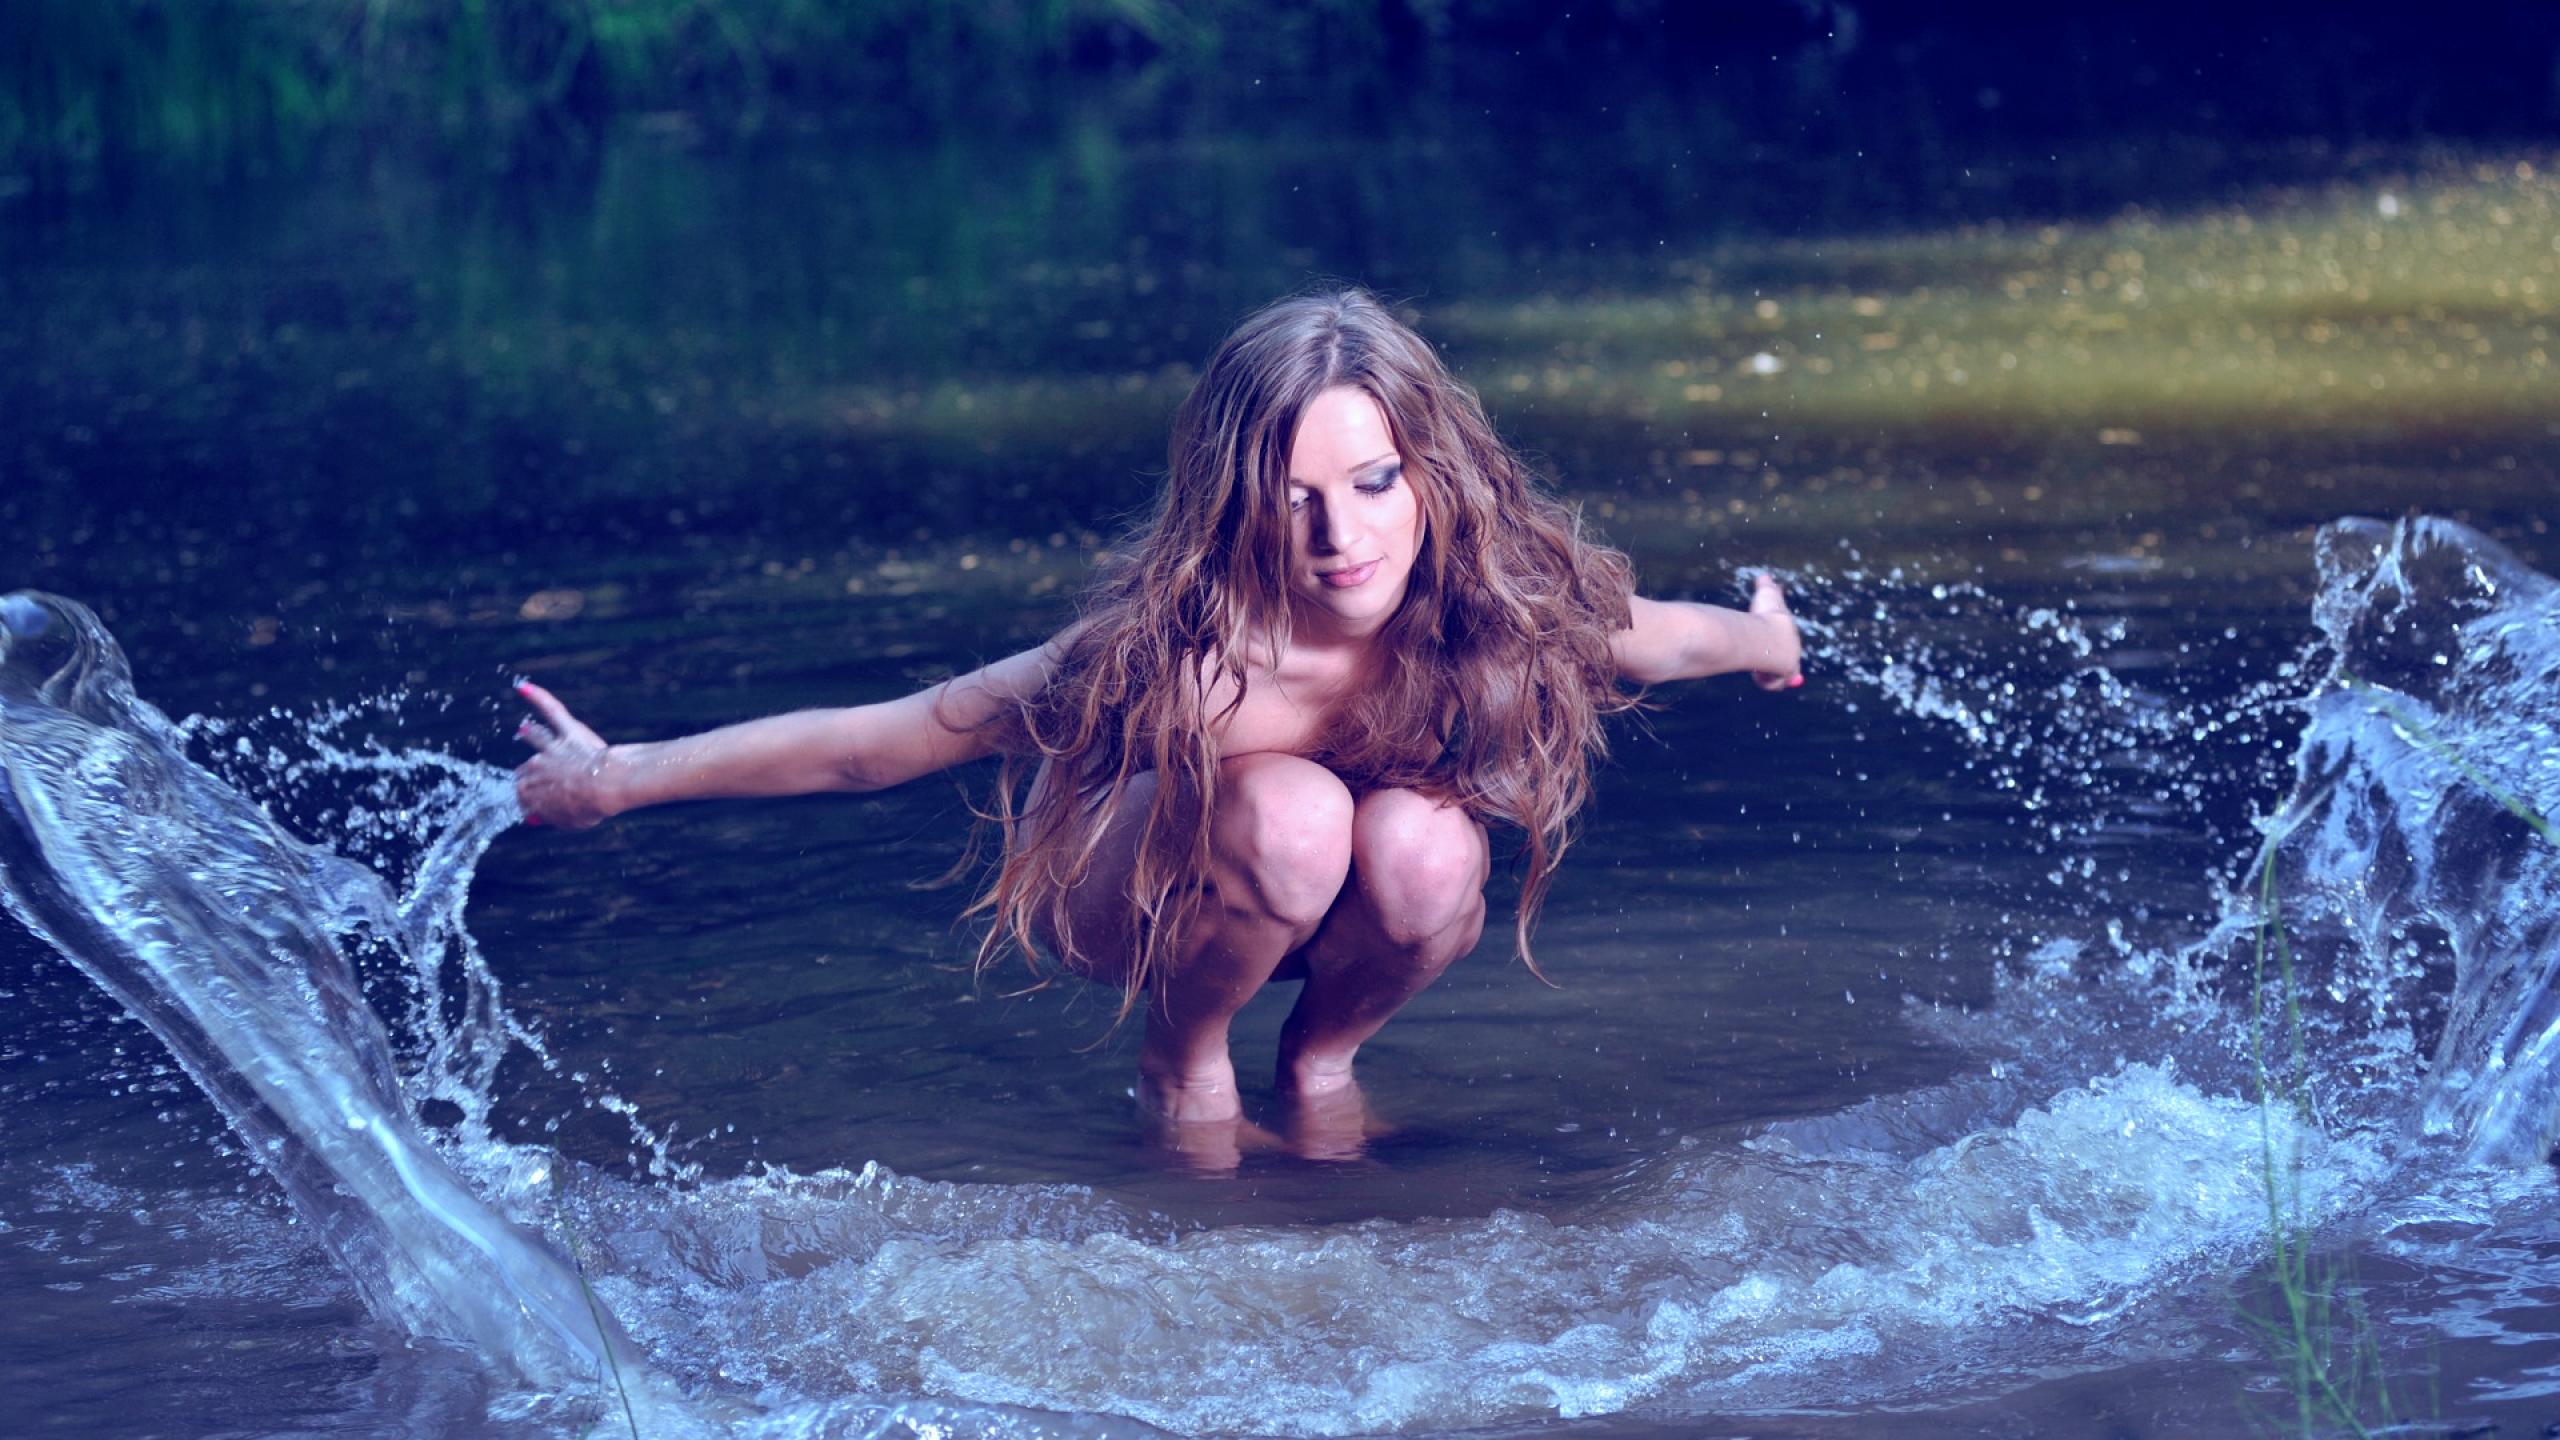 Girl in water photo